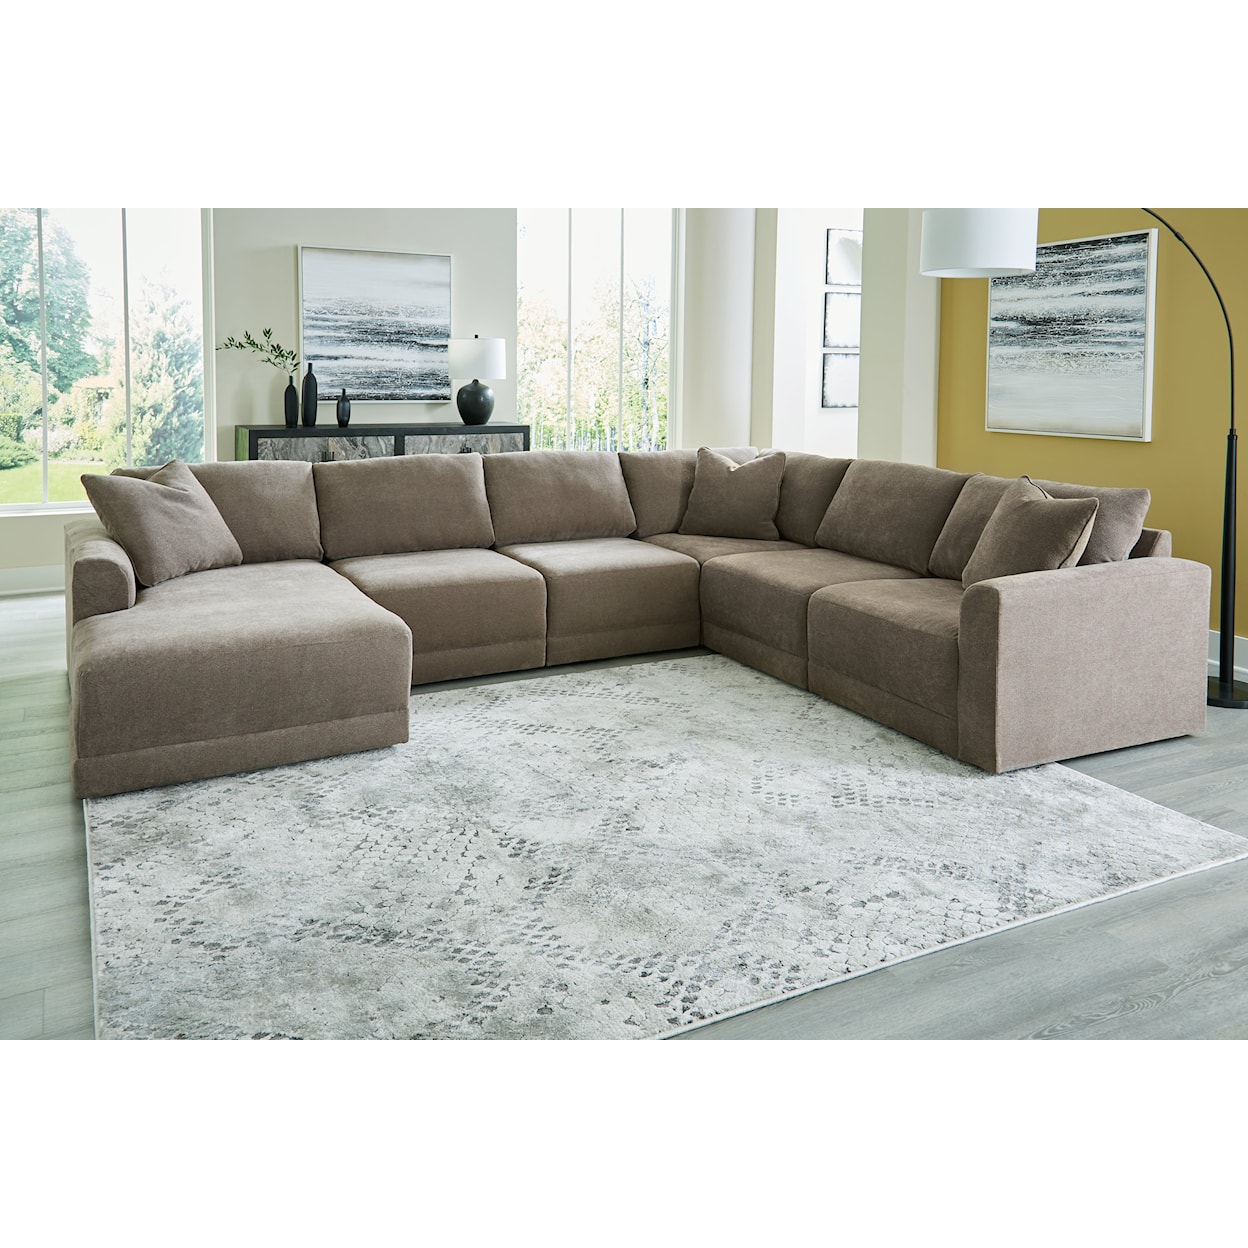 JB King Raeanna 6-Piece Sectional With Chaise